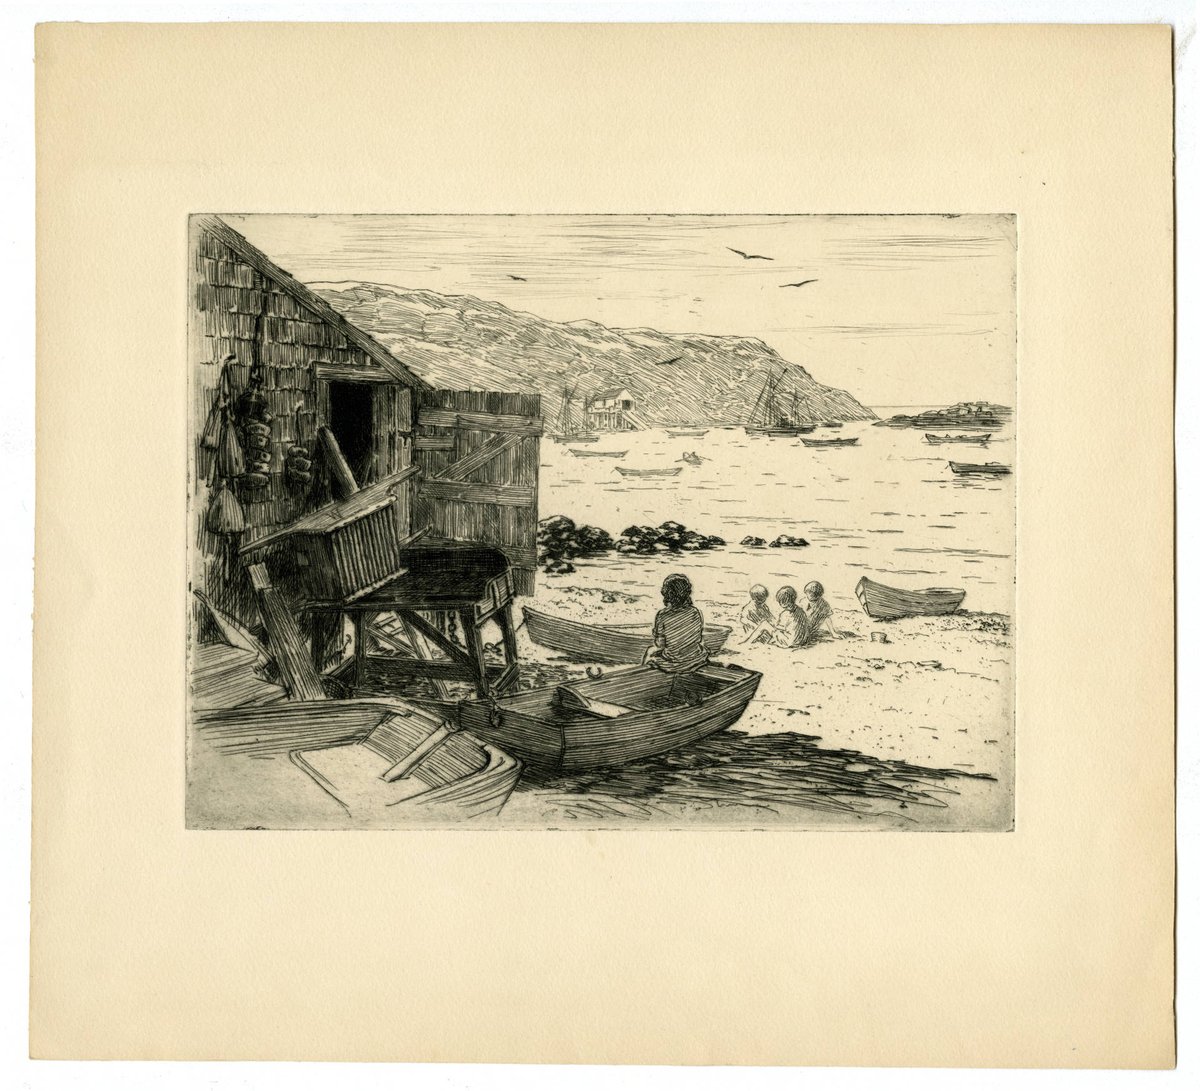 There seems to be such a strong sense of longing in this Steele drawing of the Monhegan shore and boats, with Manana in the distance. Perhaps the pandemic affects us  @SherlockUMN  @umnlib. Or a longing for justice & true freedom. "We hold these truths..."  http://purl.umn.edu/99538 